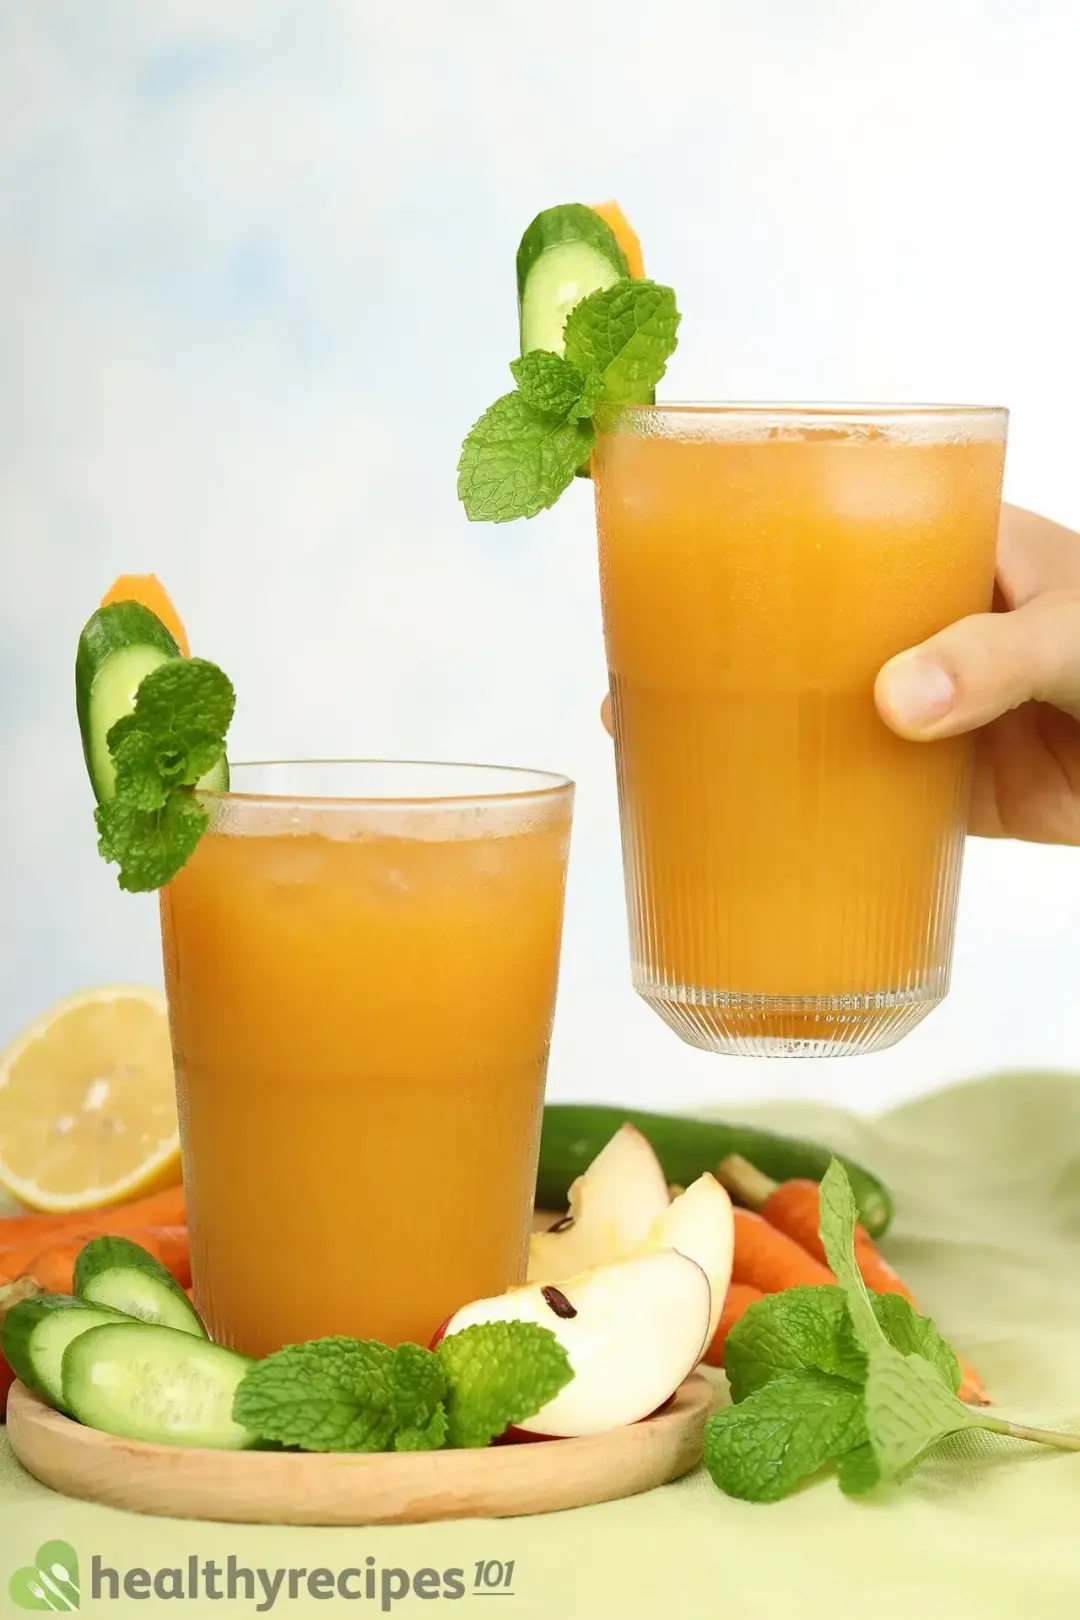 Two identical glasses of brown cucumber carrot drinks, next to sliced cucumbers, lemon wheels, baby carrots, and several apple quarters